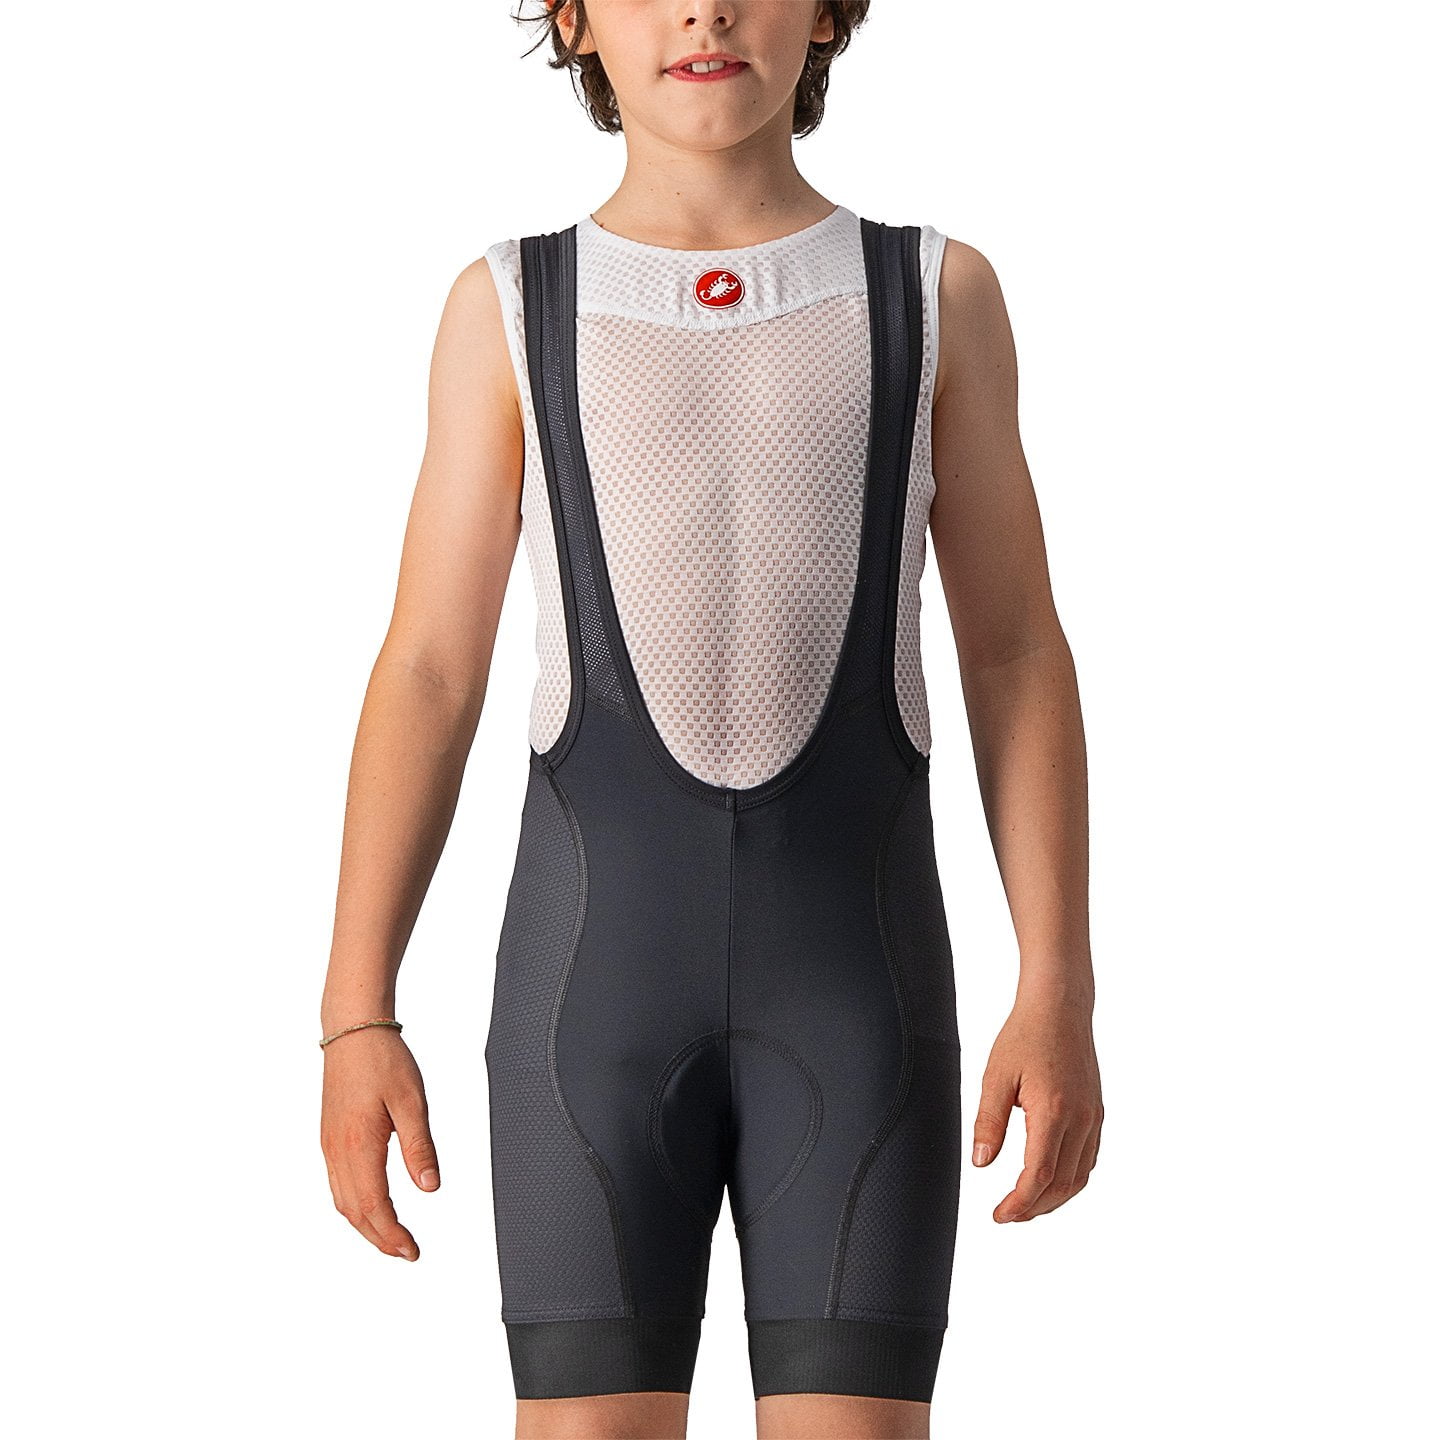 CASTELLI JR Competizione Kids Bib Tights, size S, Kids cycling trousers, Kids cycle clothing